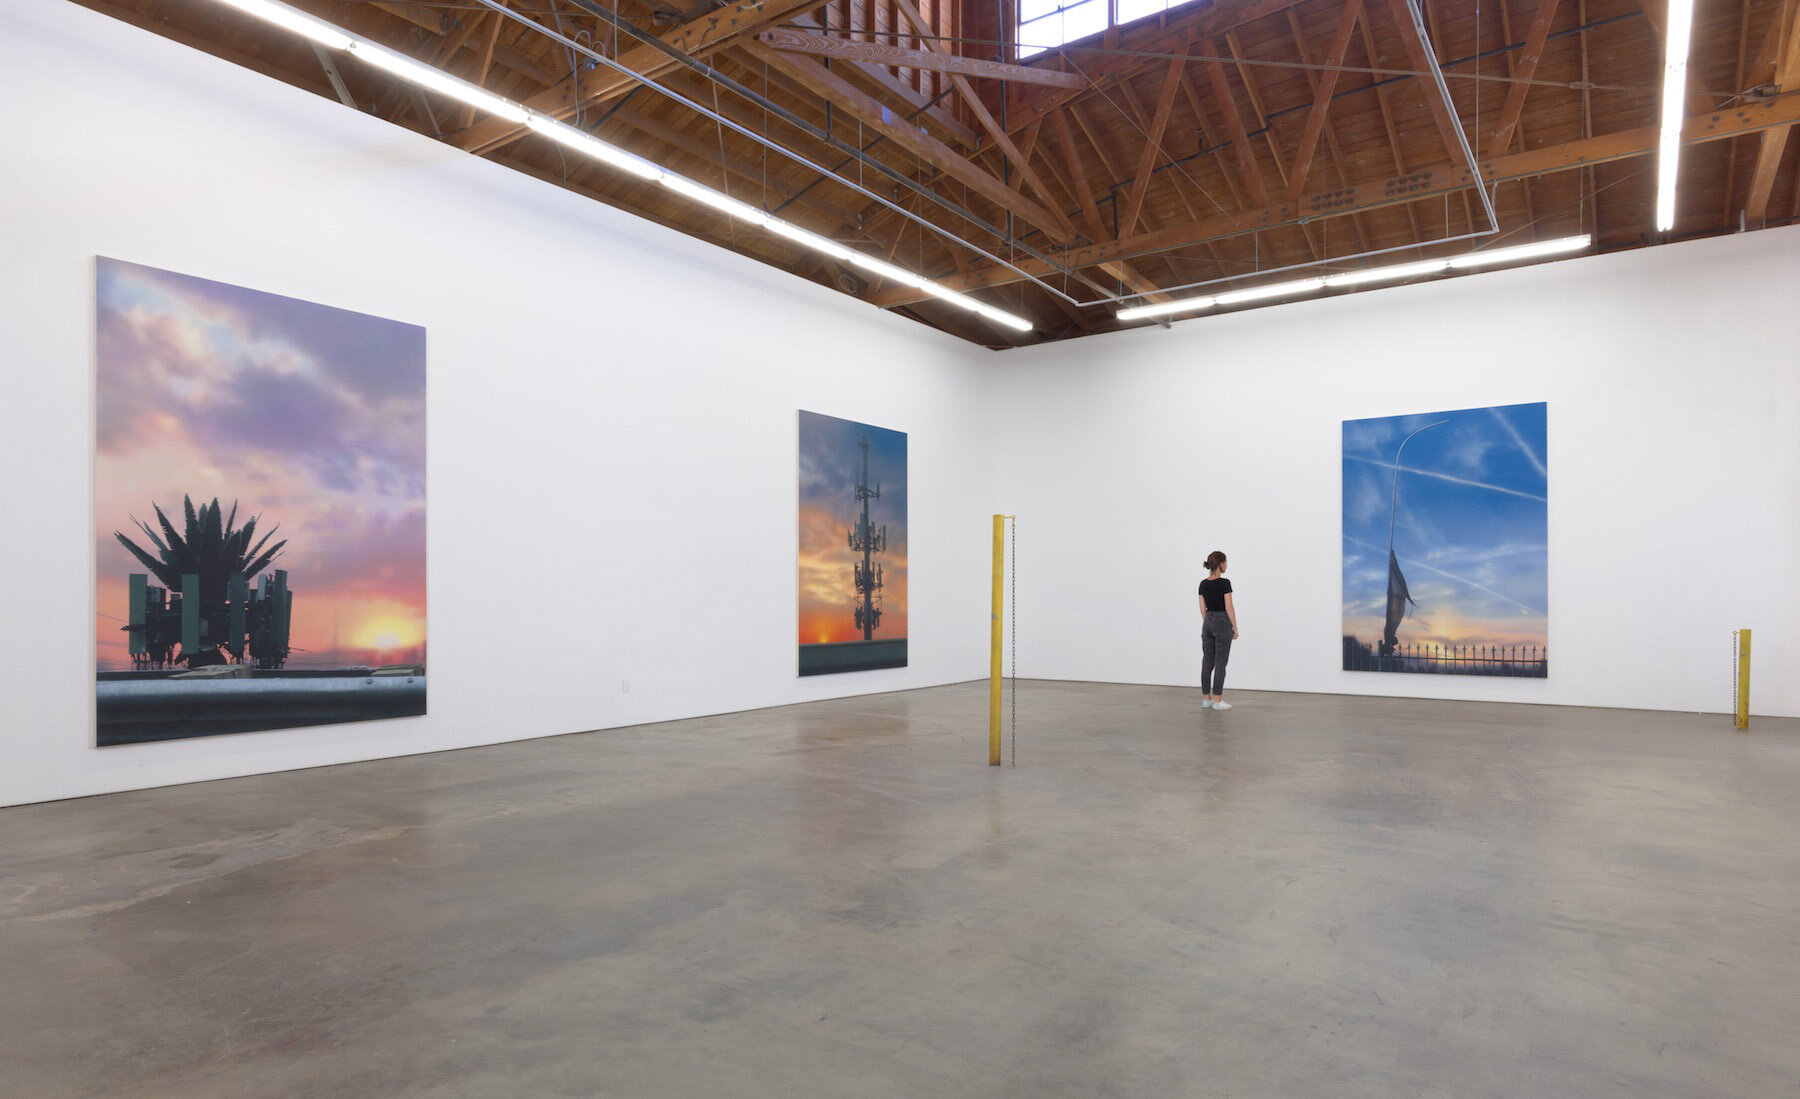  X-Scapes, 2019. Installation view. Image credit: Robert Wedemeyer 